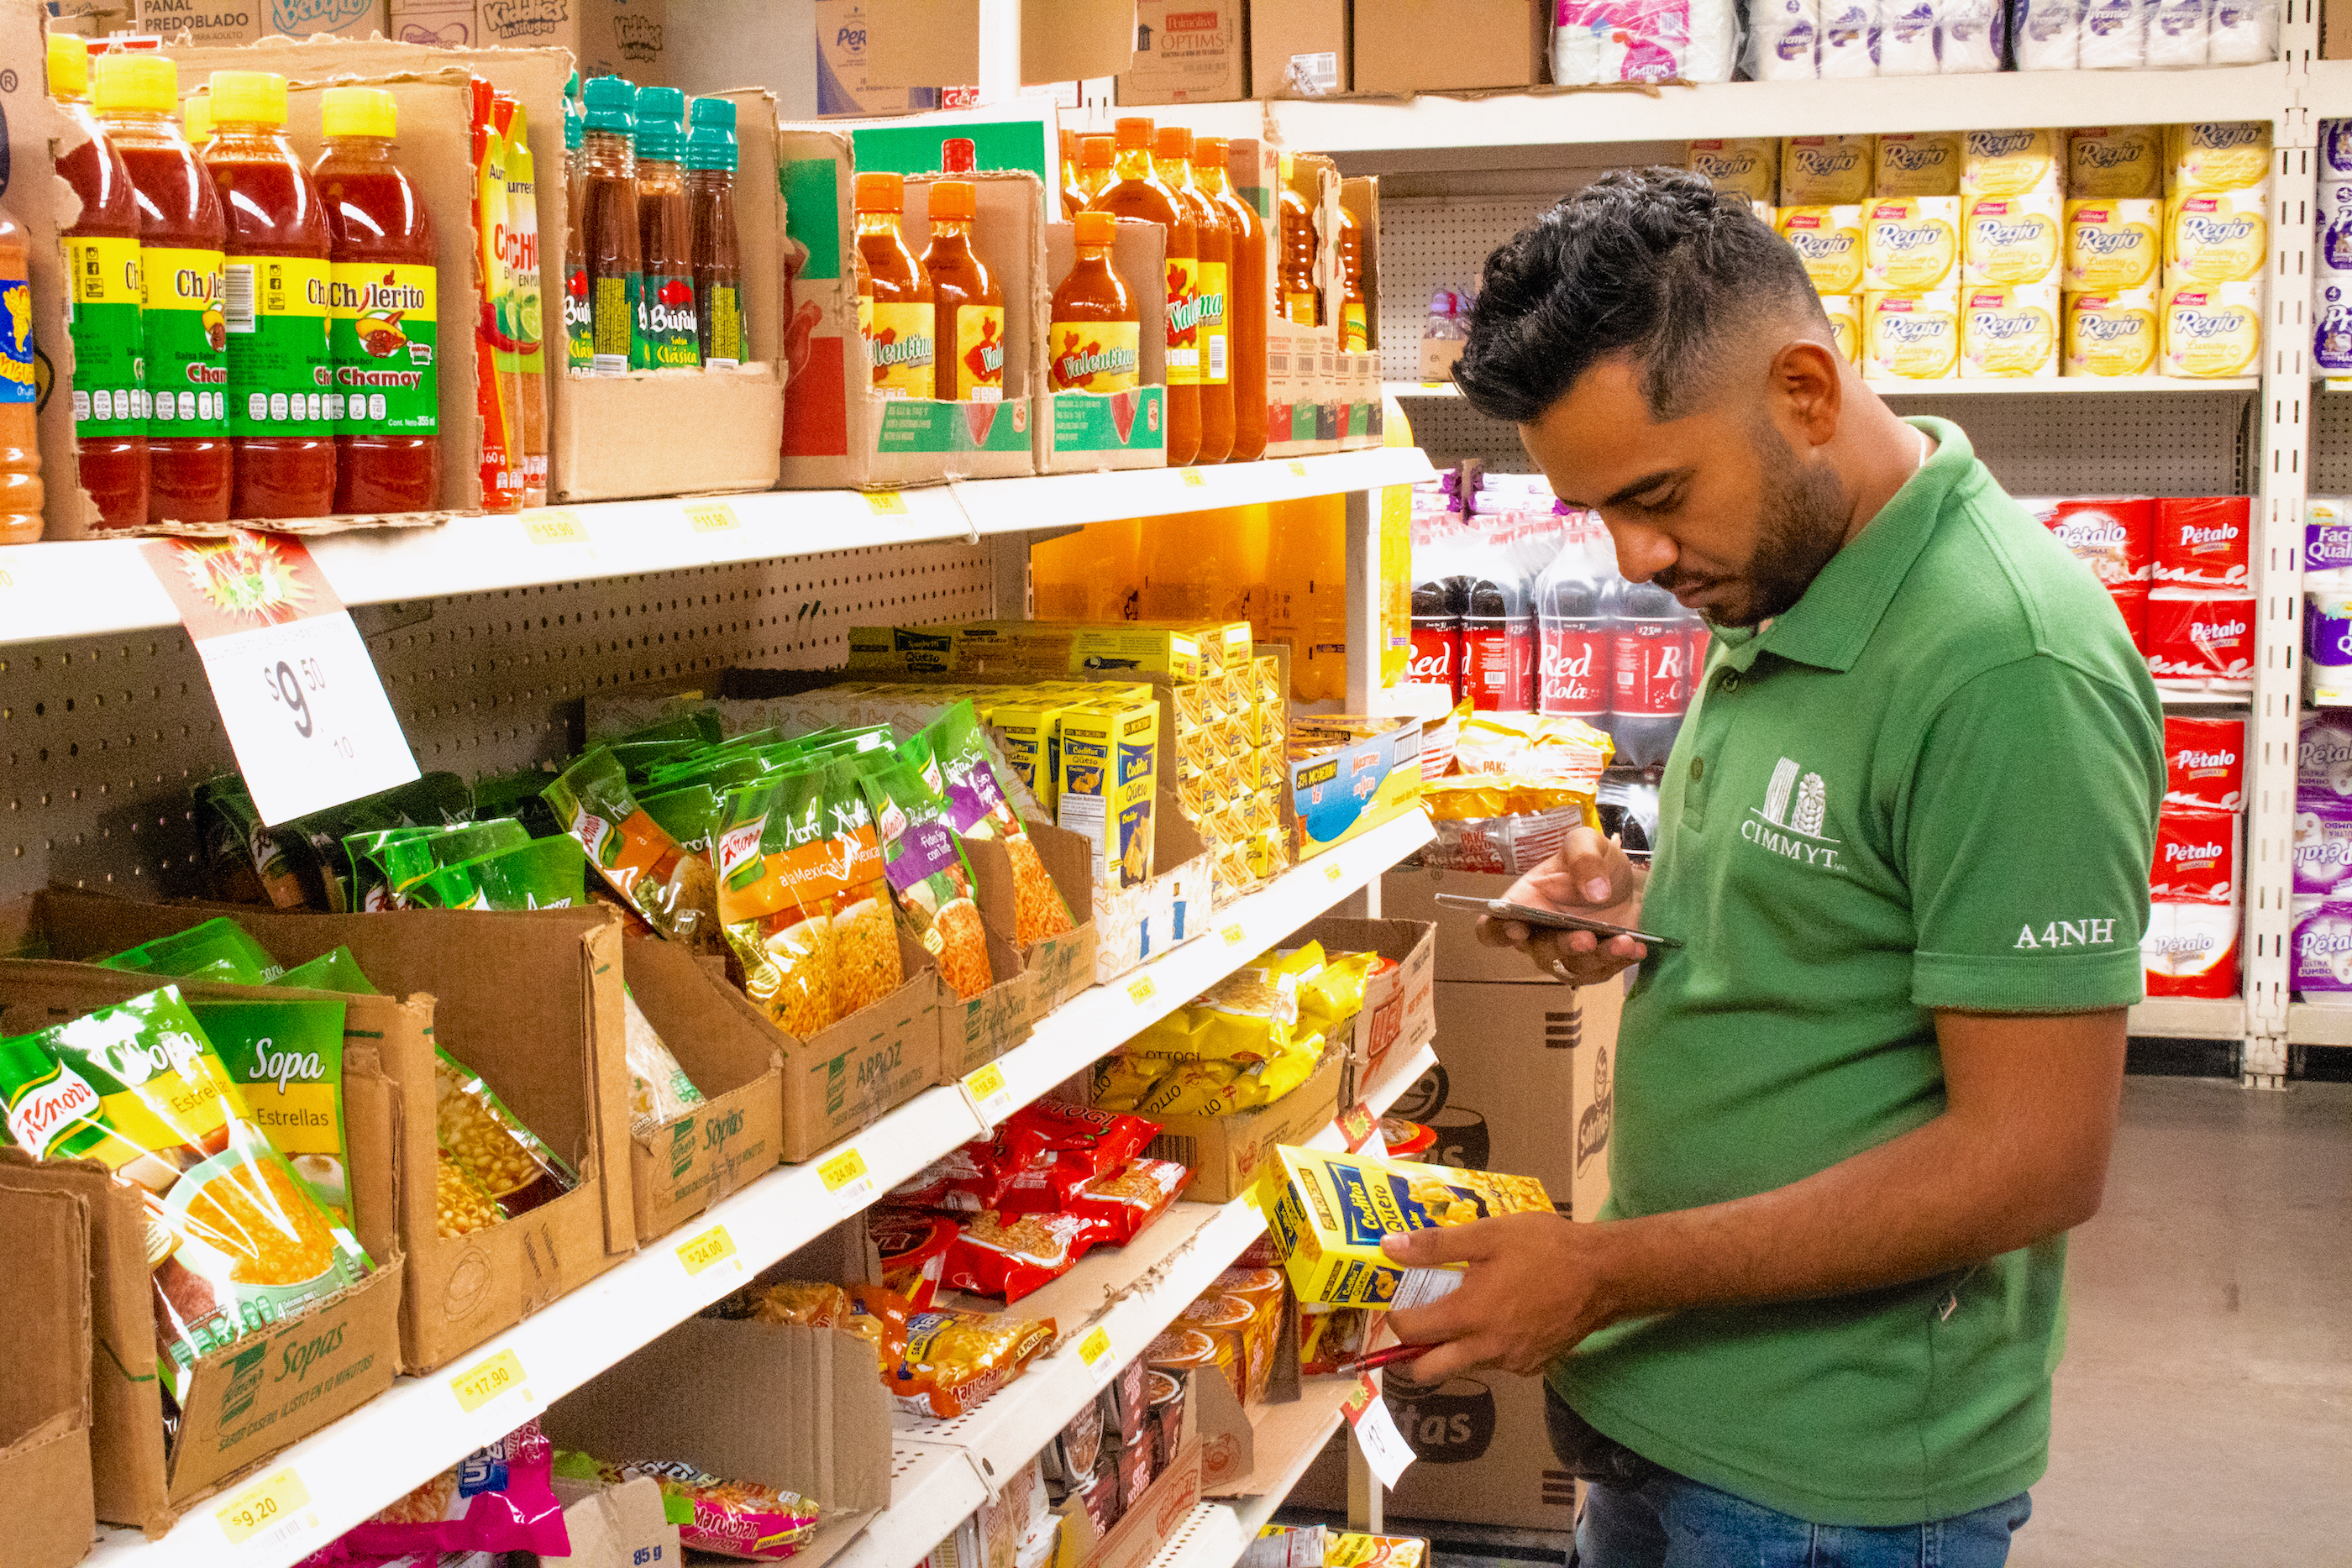 In a small supermarket in San Vicente, the research team found nearly 50 different types of biscuits and around 80 savory maize-based snacks like chips and tortillas. (Photo: Emma Orchardson/CIMMYT)